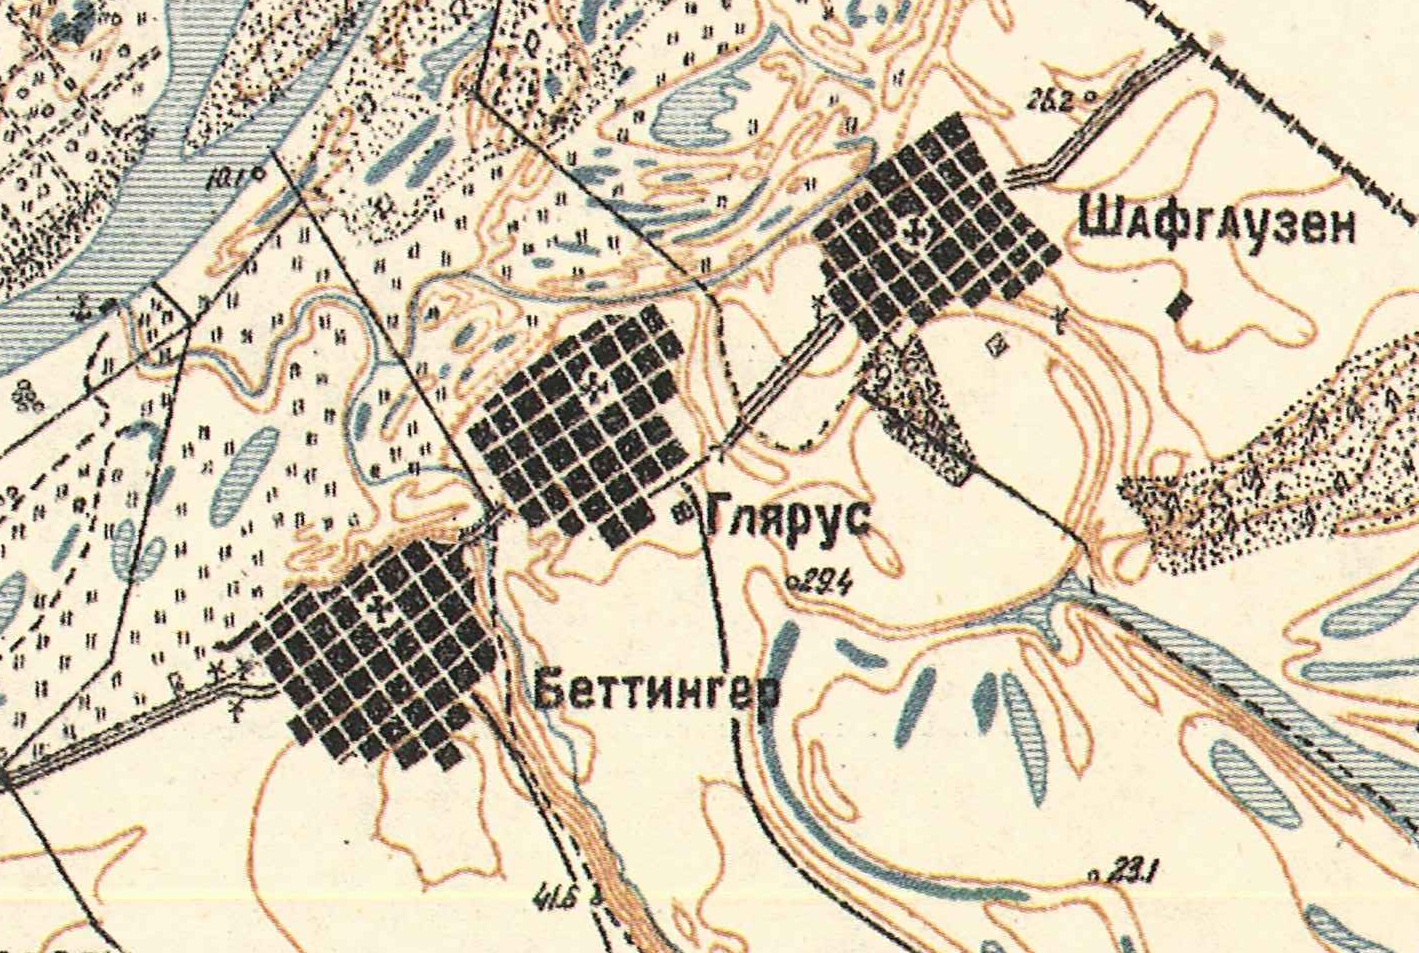 Map showing Schaffhausen on the right (1935).